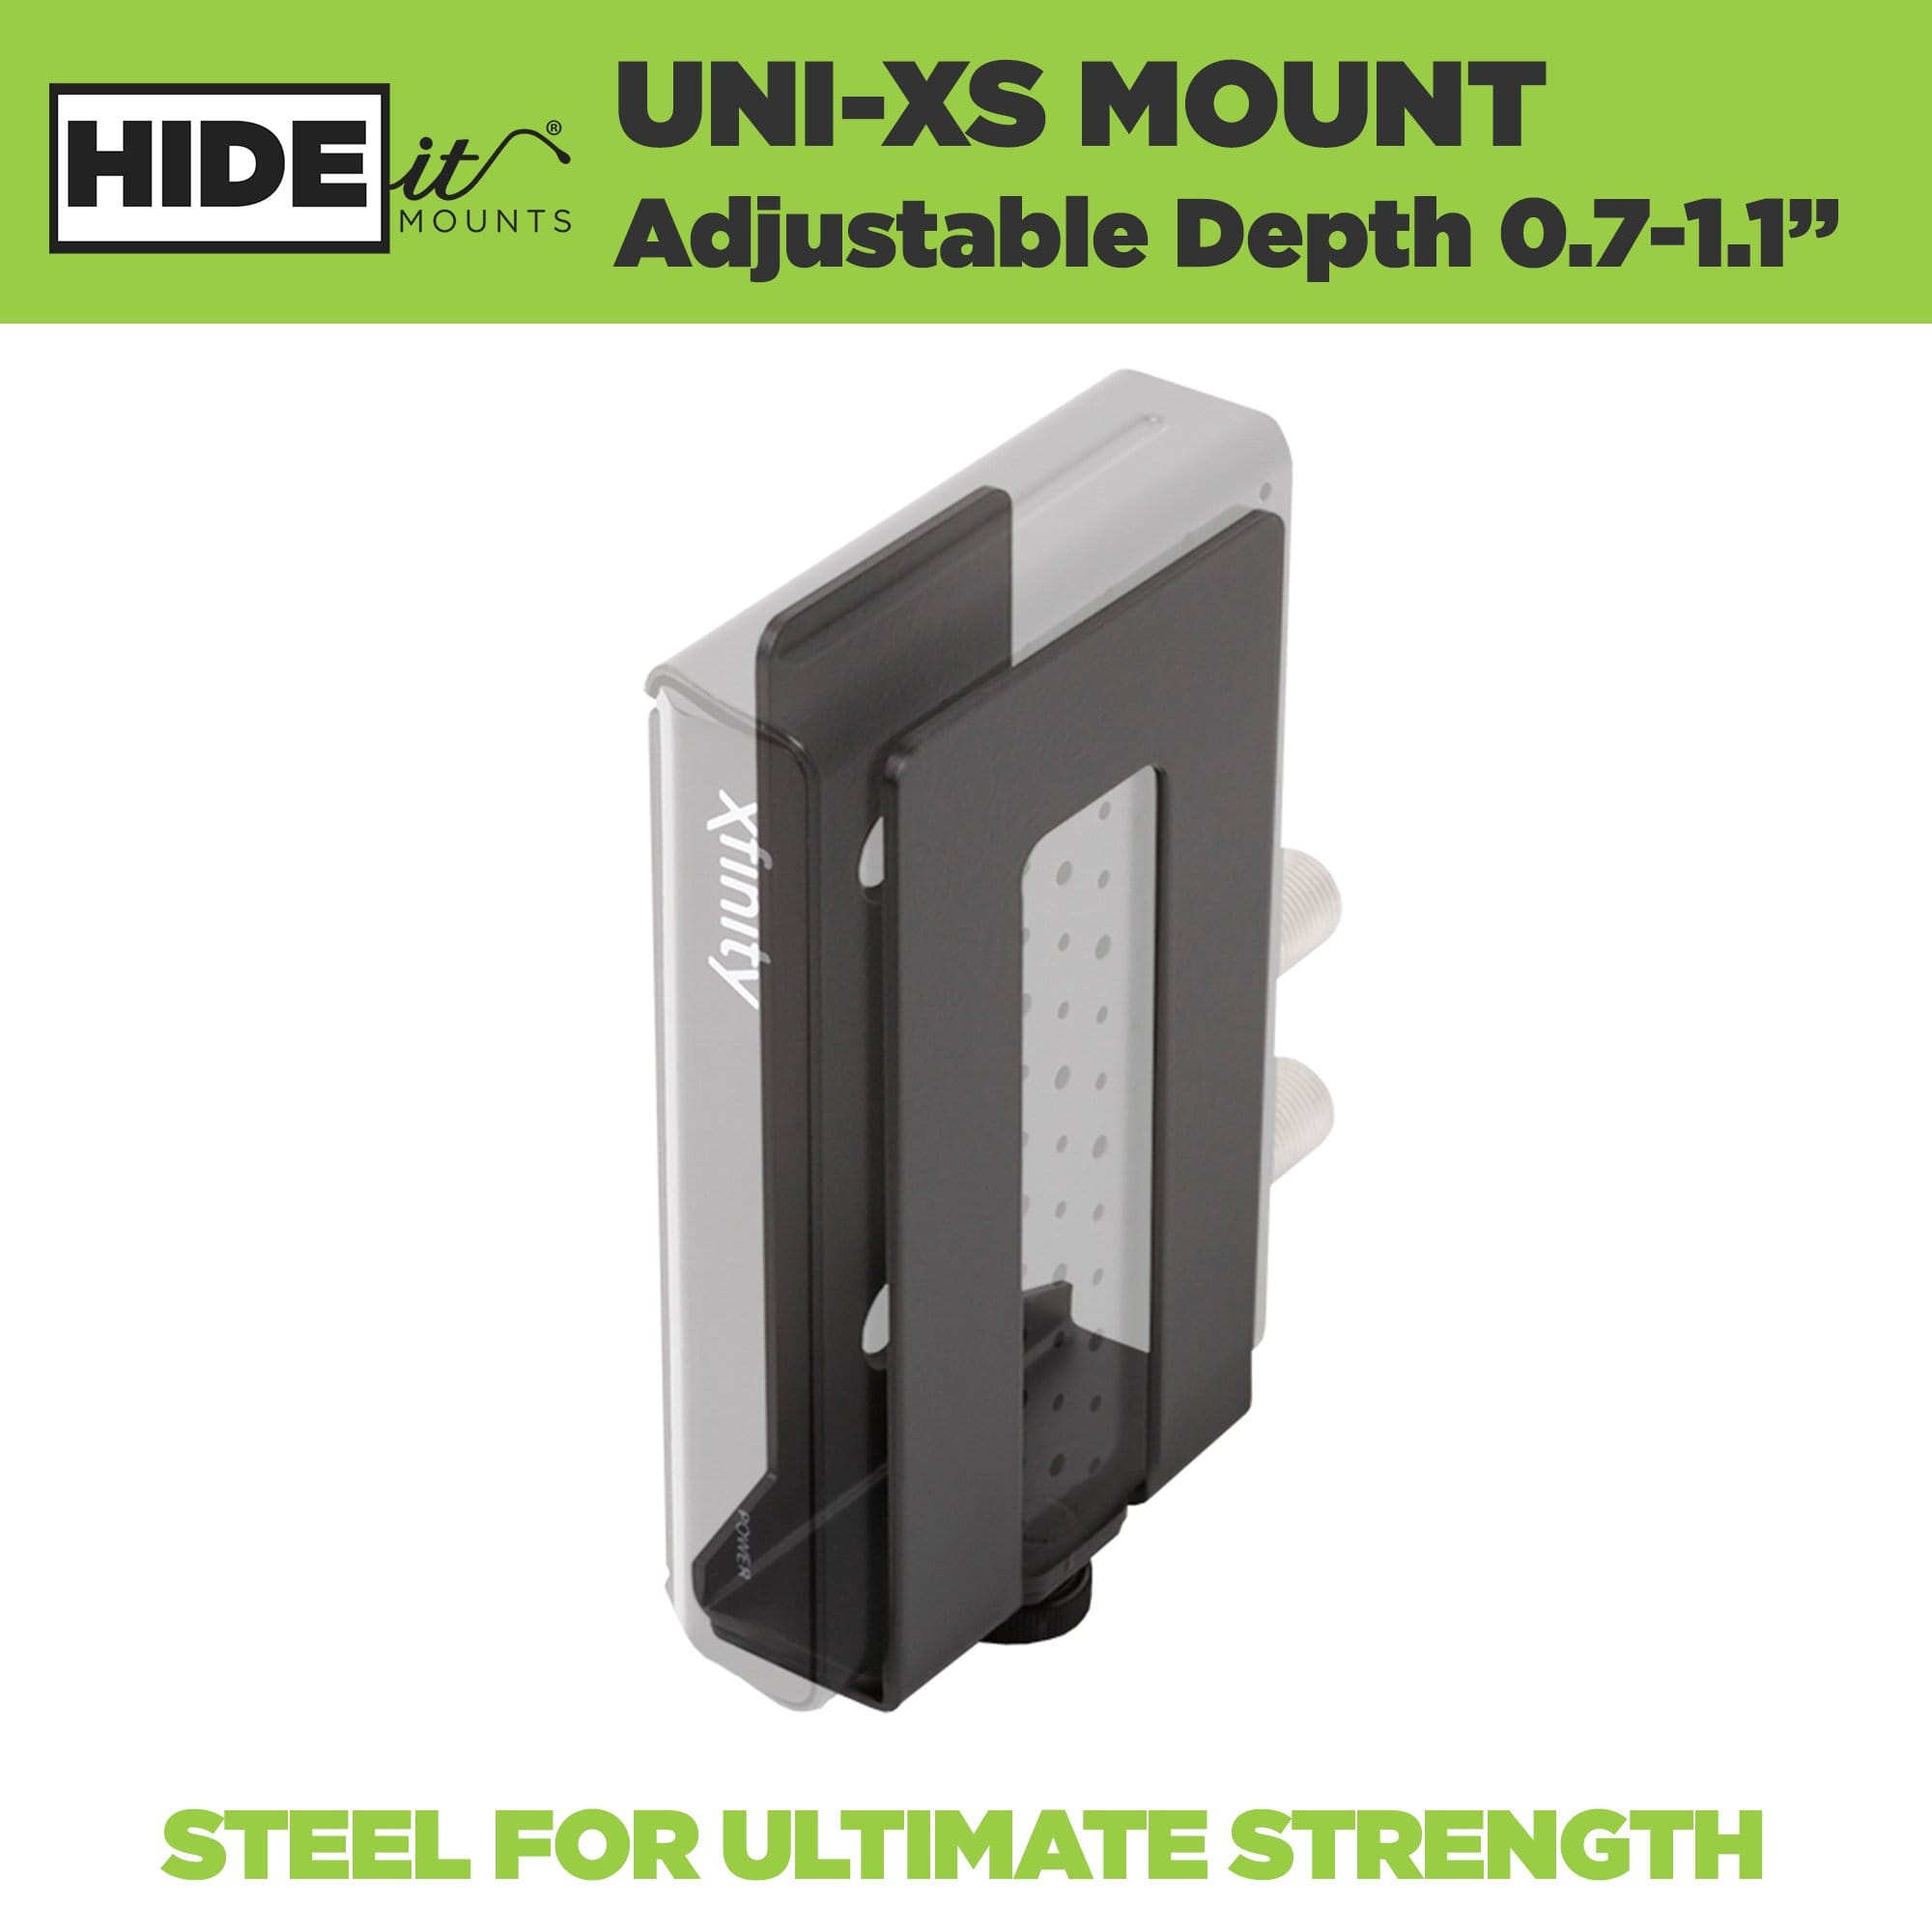 Adjustable steel HIDEit Uni-XS Mount holds extra small electronics and can be wall or VESA mounted.